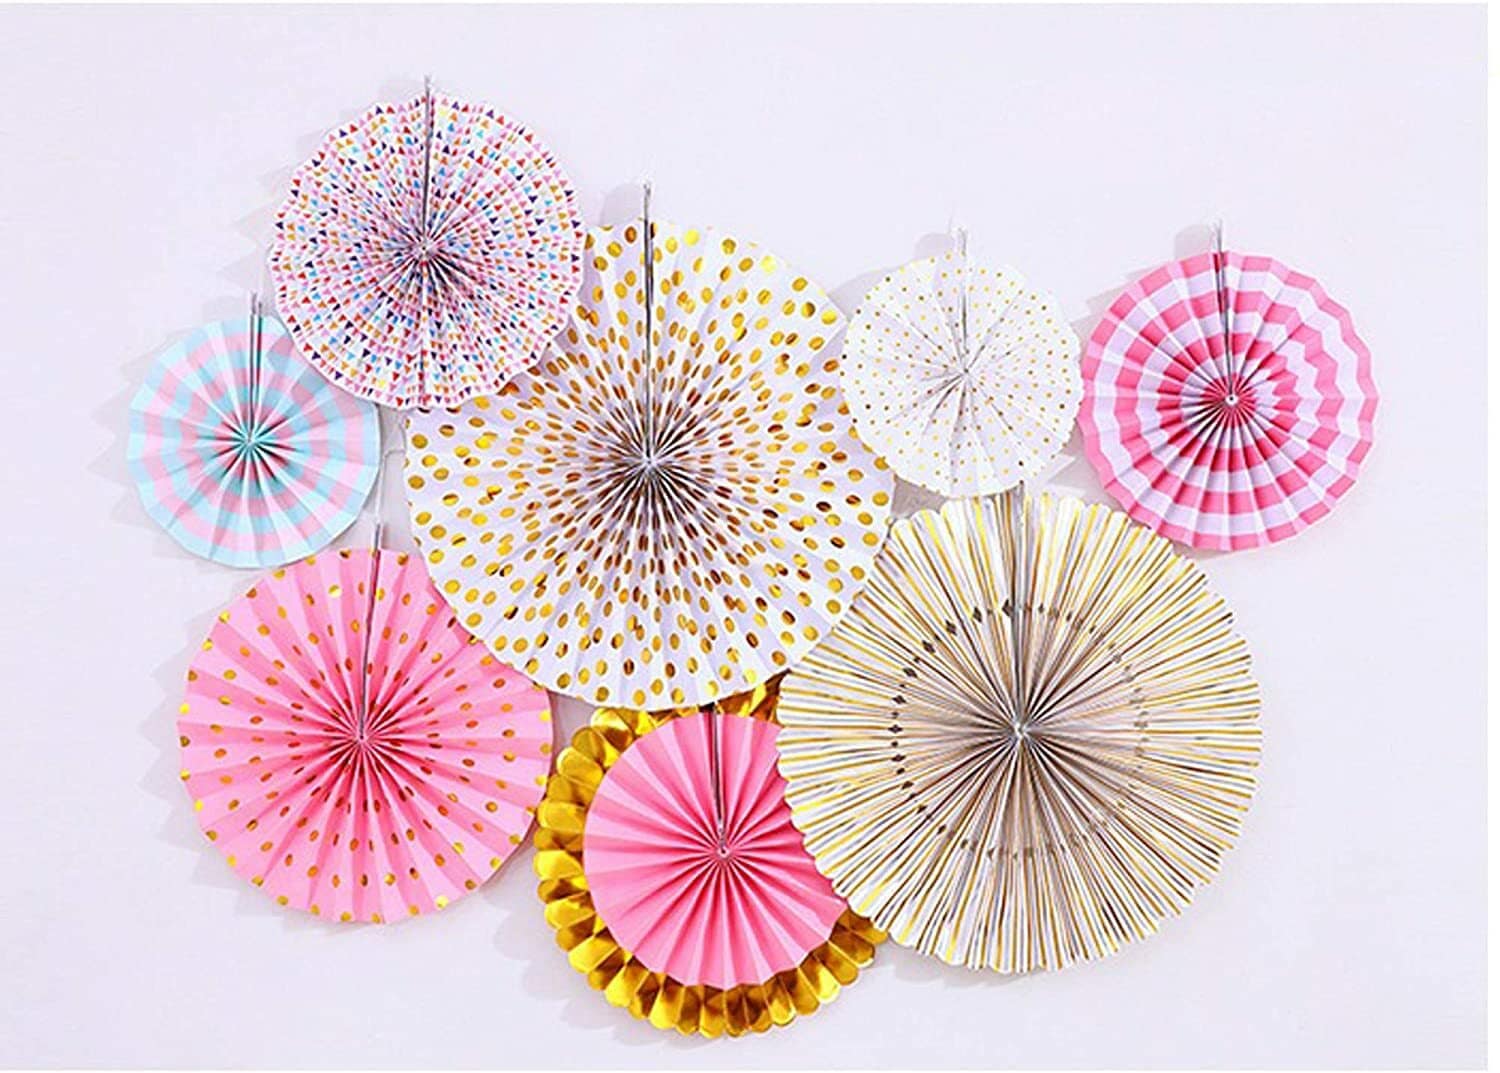 Party Time Hanging Paper Fans Pinwheel Backdrop Craft Fan Festival Supplies Flower Gifts Wedding Decoration Birthday Banner Wall Home Decorations Diy 8 Pcs Set Mix Colors - How To Make Decorative Items At Home With Paper